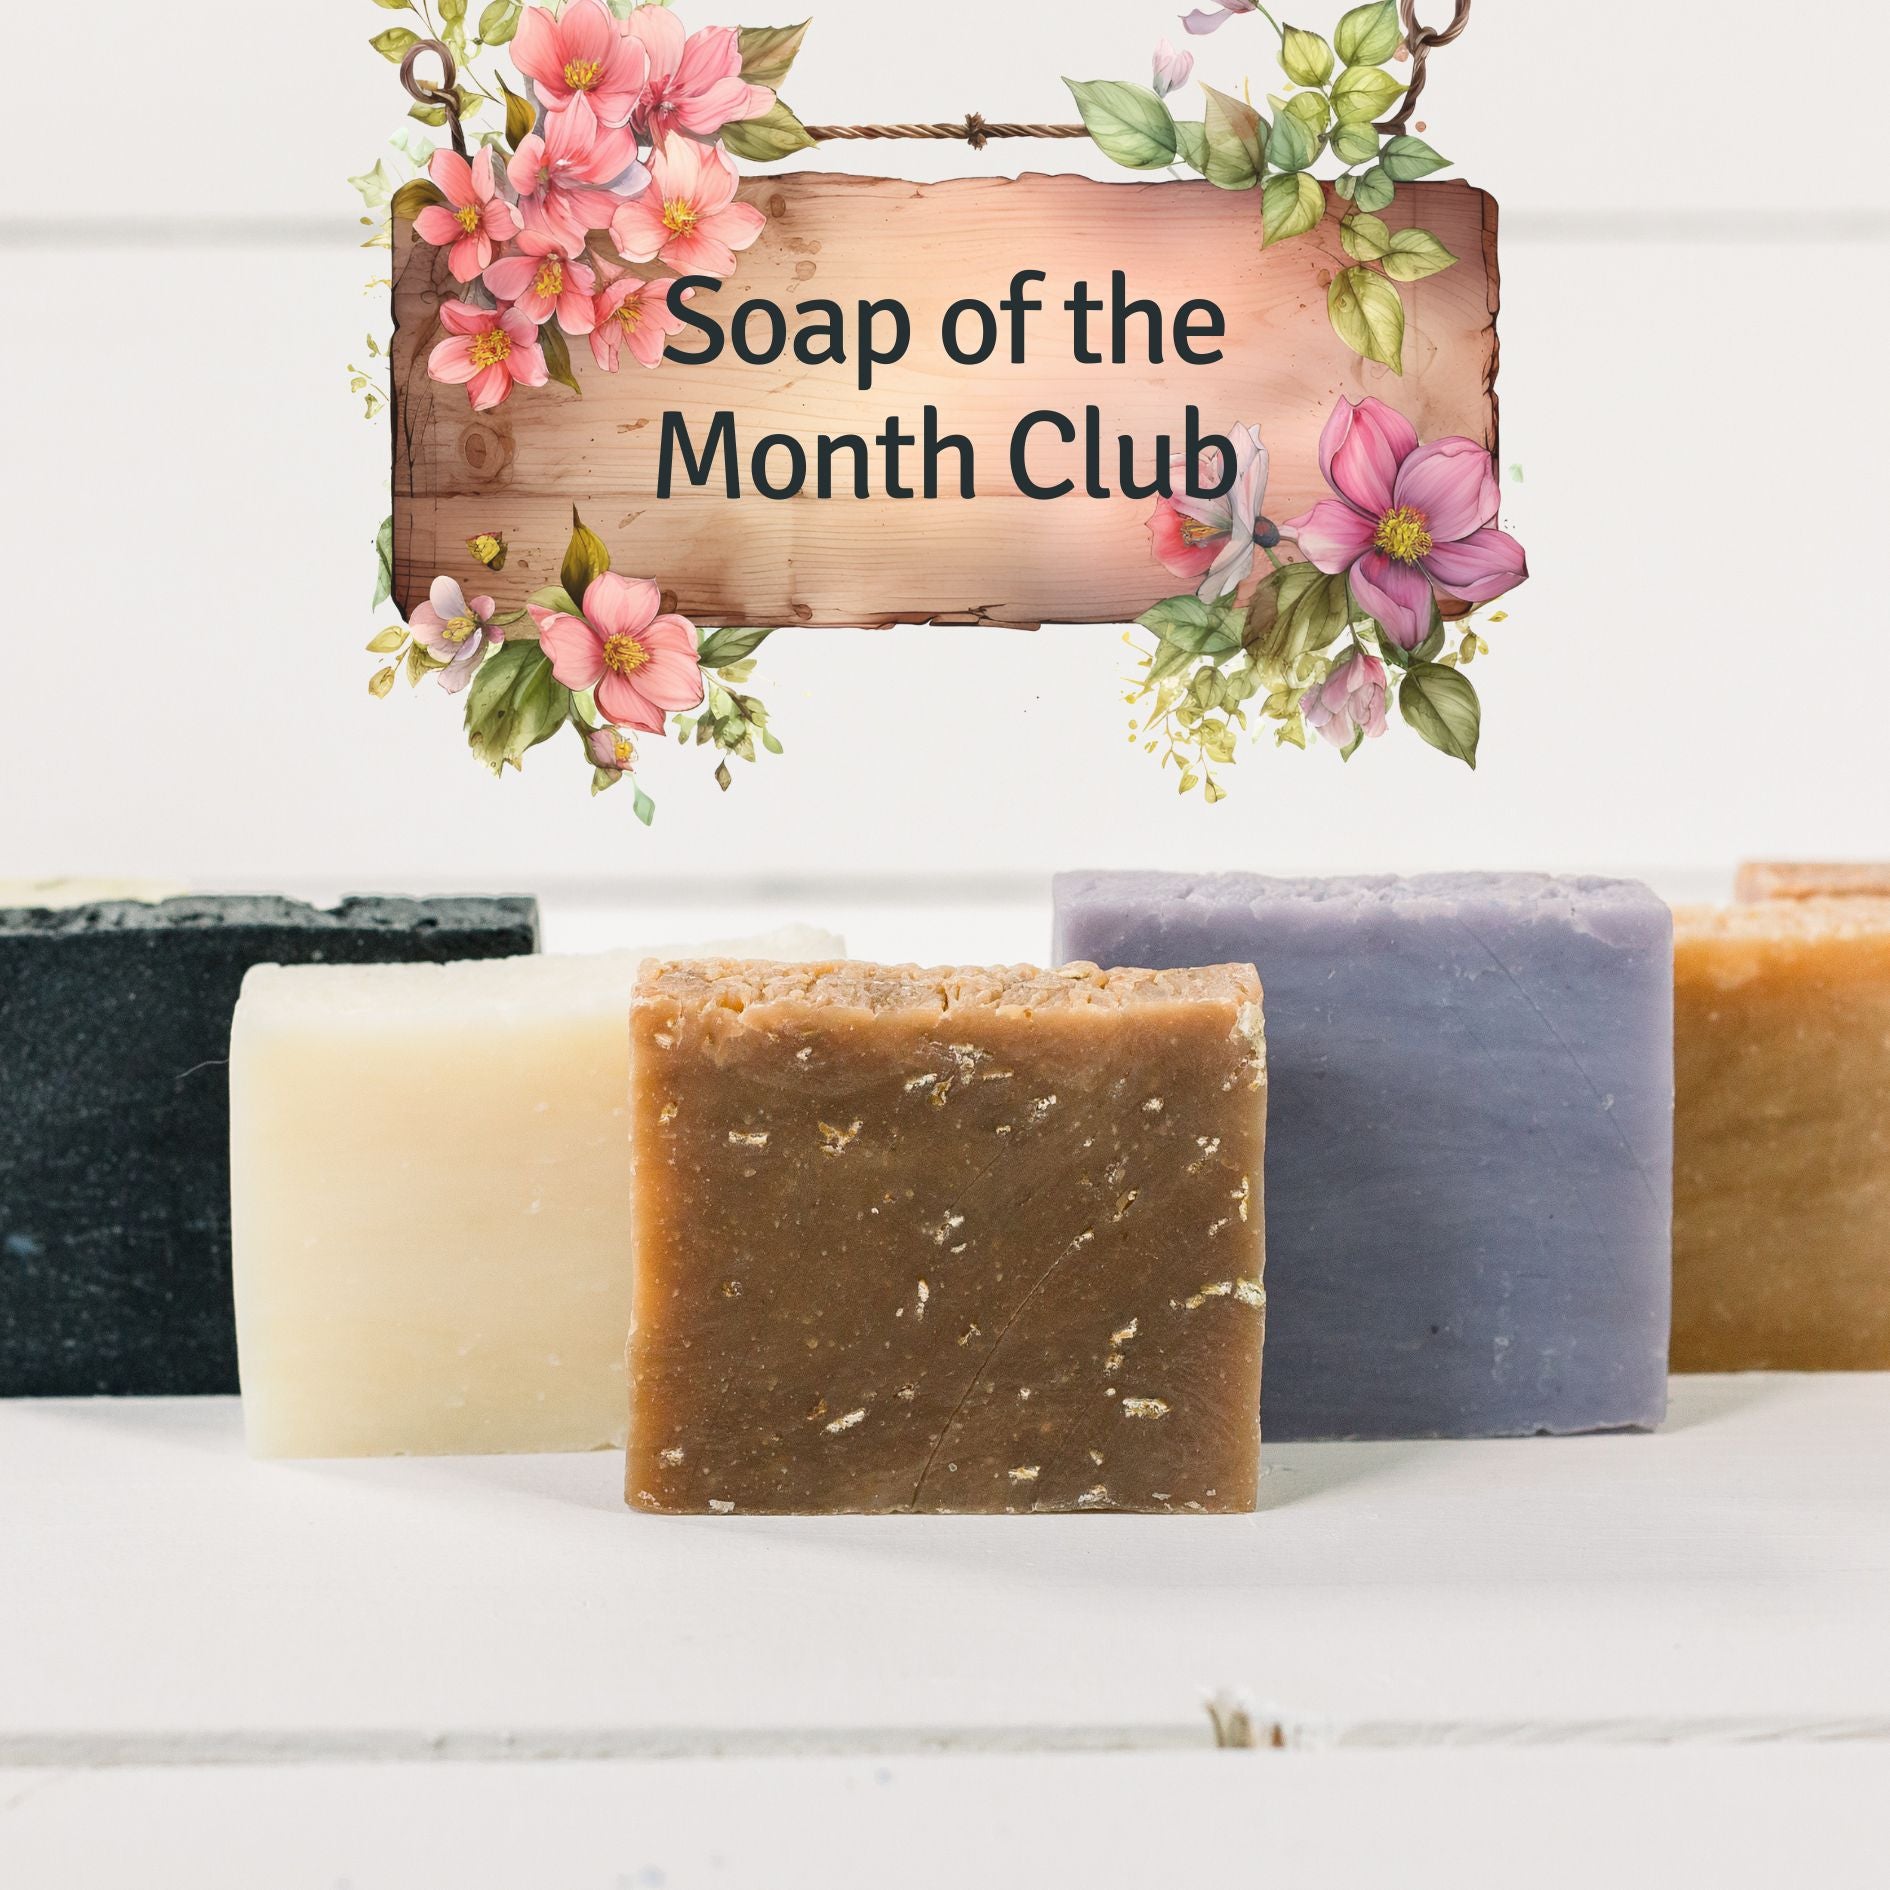 SOAP OF THE MONTH CLUB SUBSCRIPTION BOX